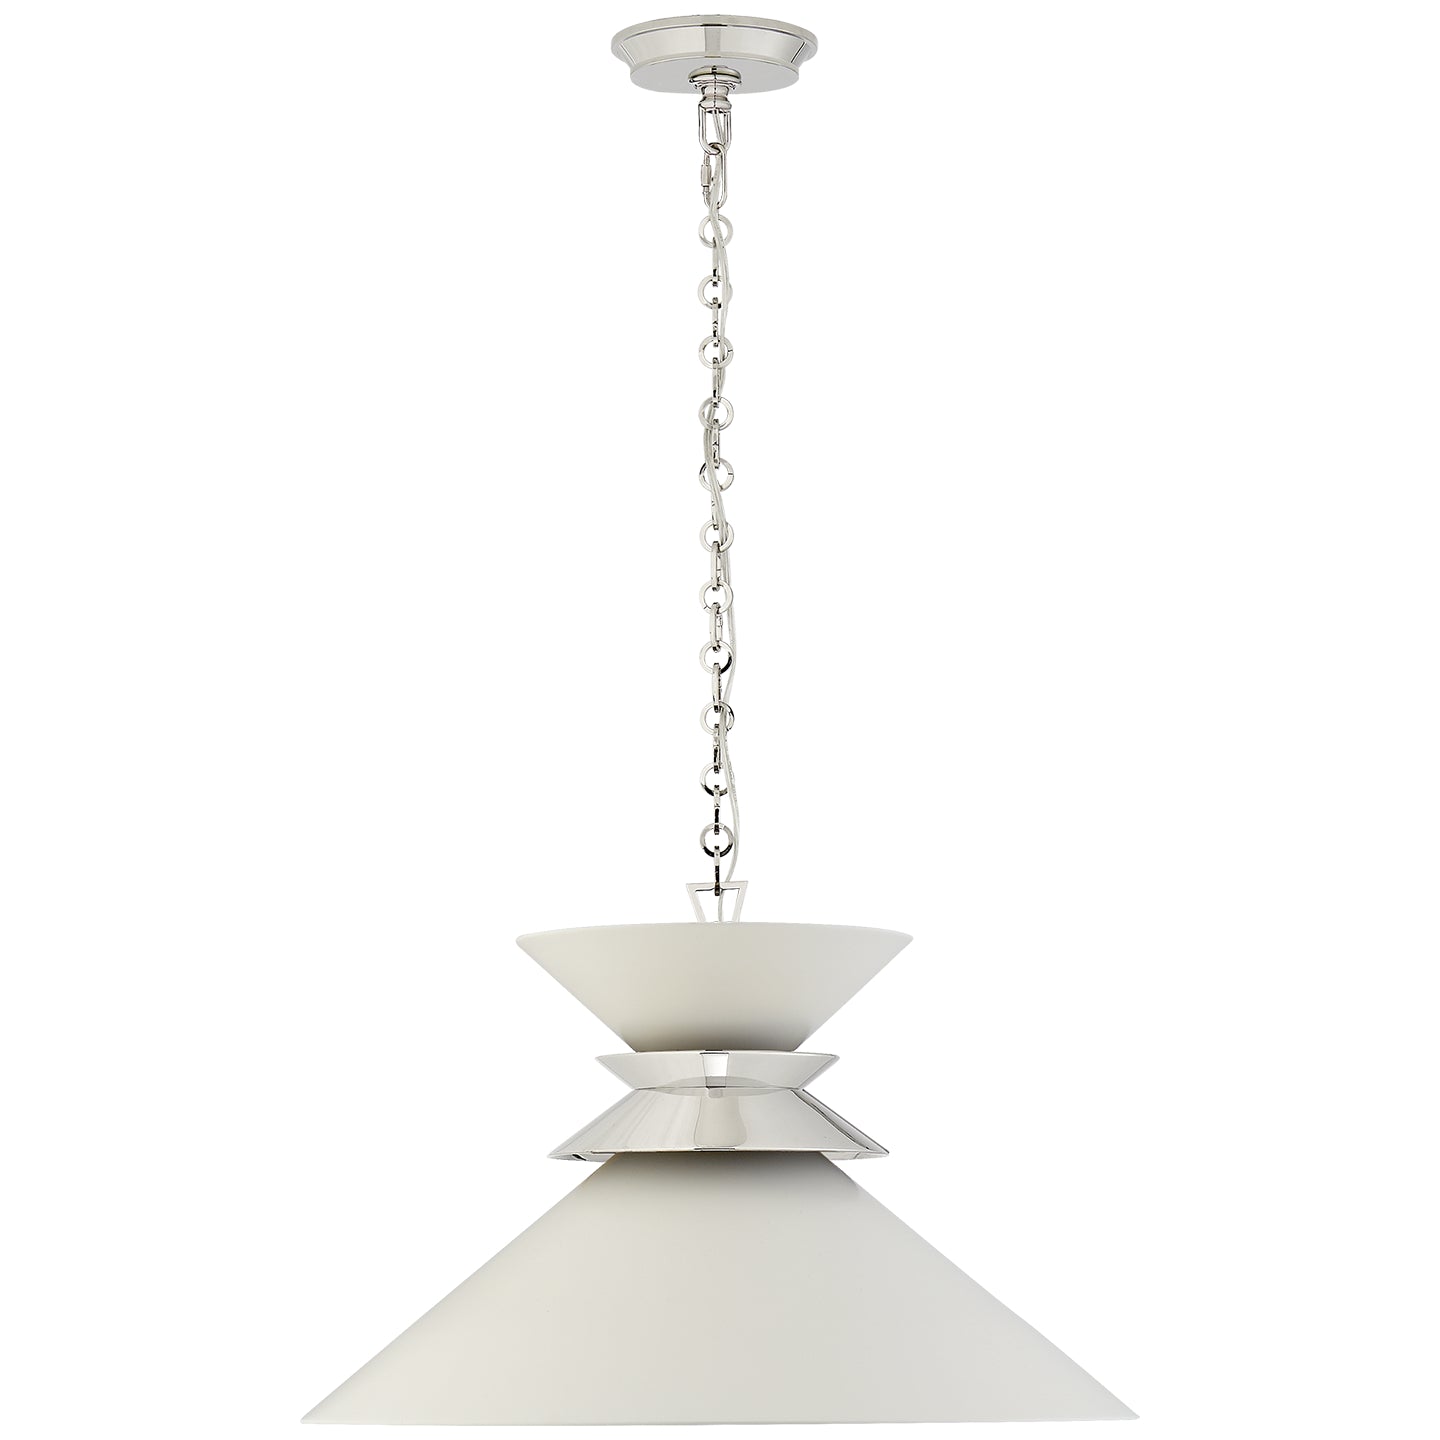 Load image into Gallery viewer, Visual Comfort Signature - CHC 5245PN-WHT - One Light Pendant - Alborg - Polished Nickel
